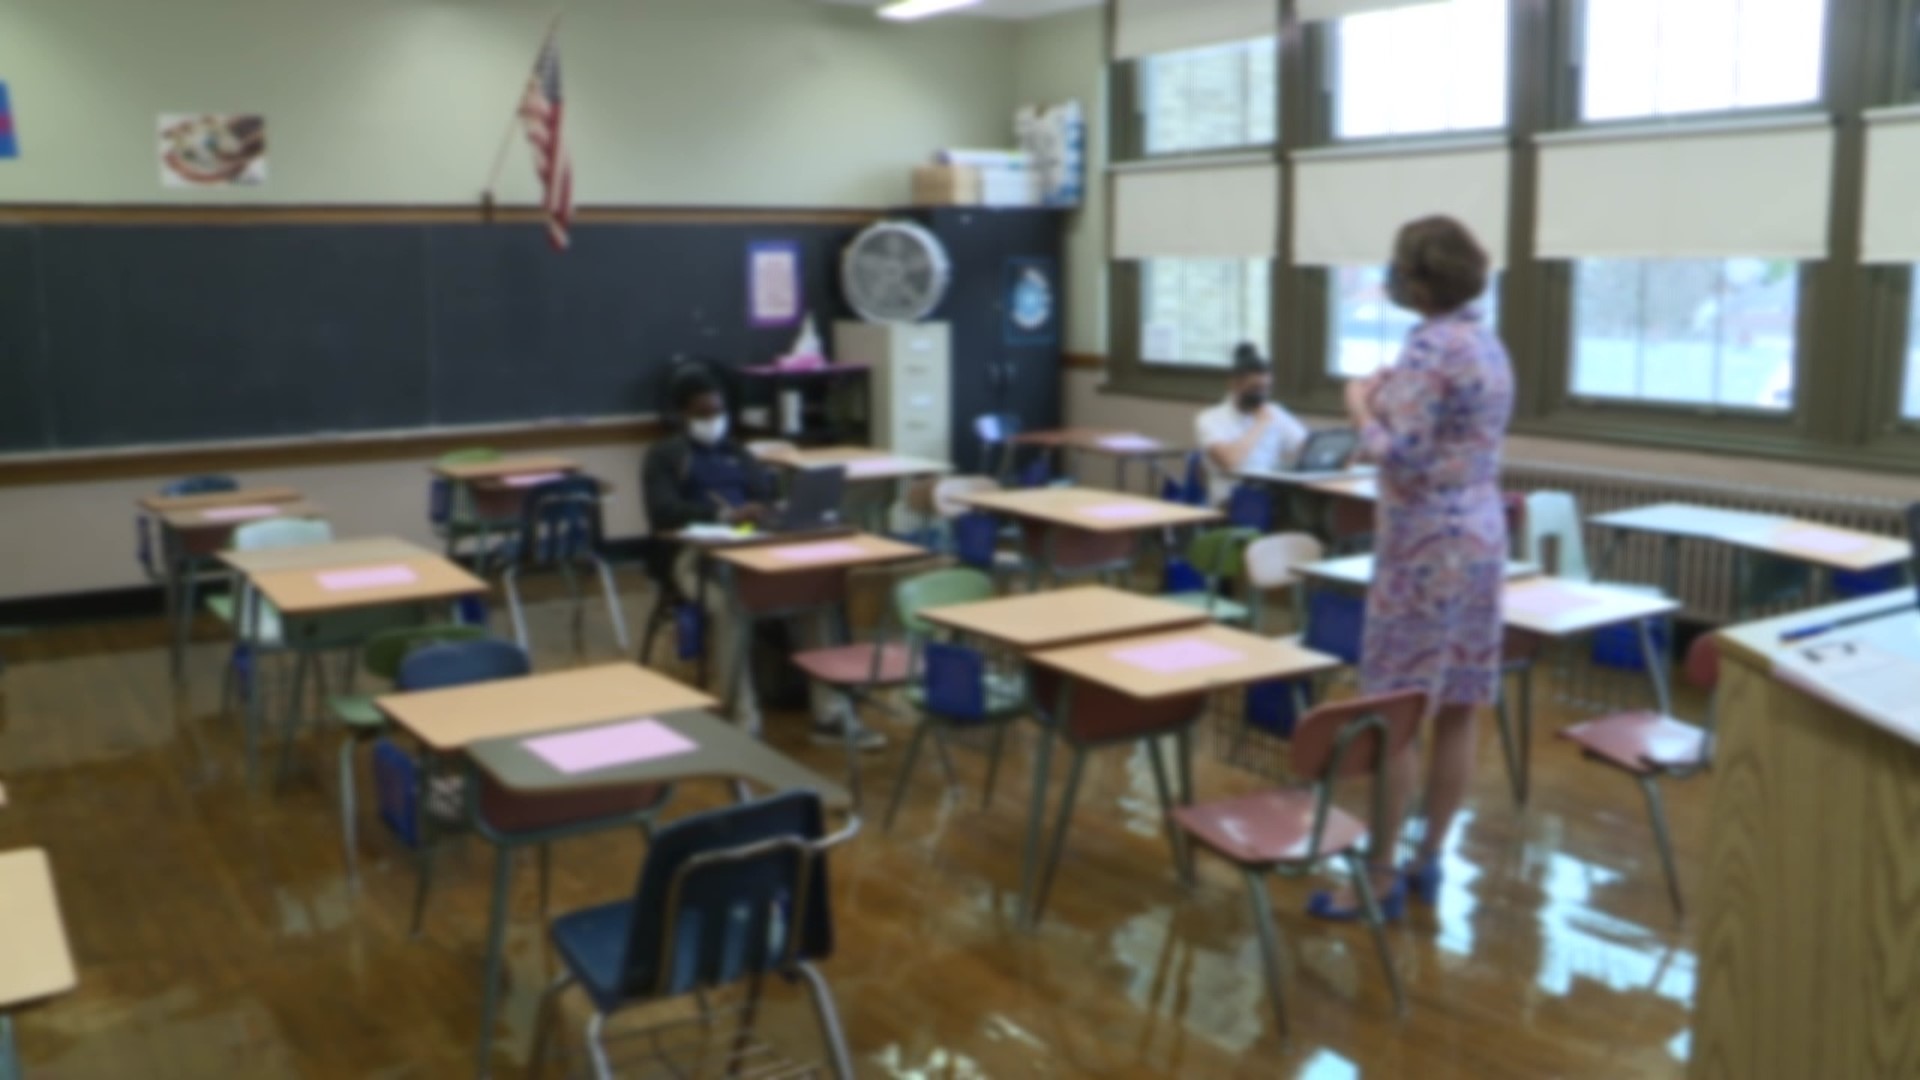 Some intermediate and high school students in the Scranton School District stepped into classrooms for the first time in more than a year.